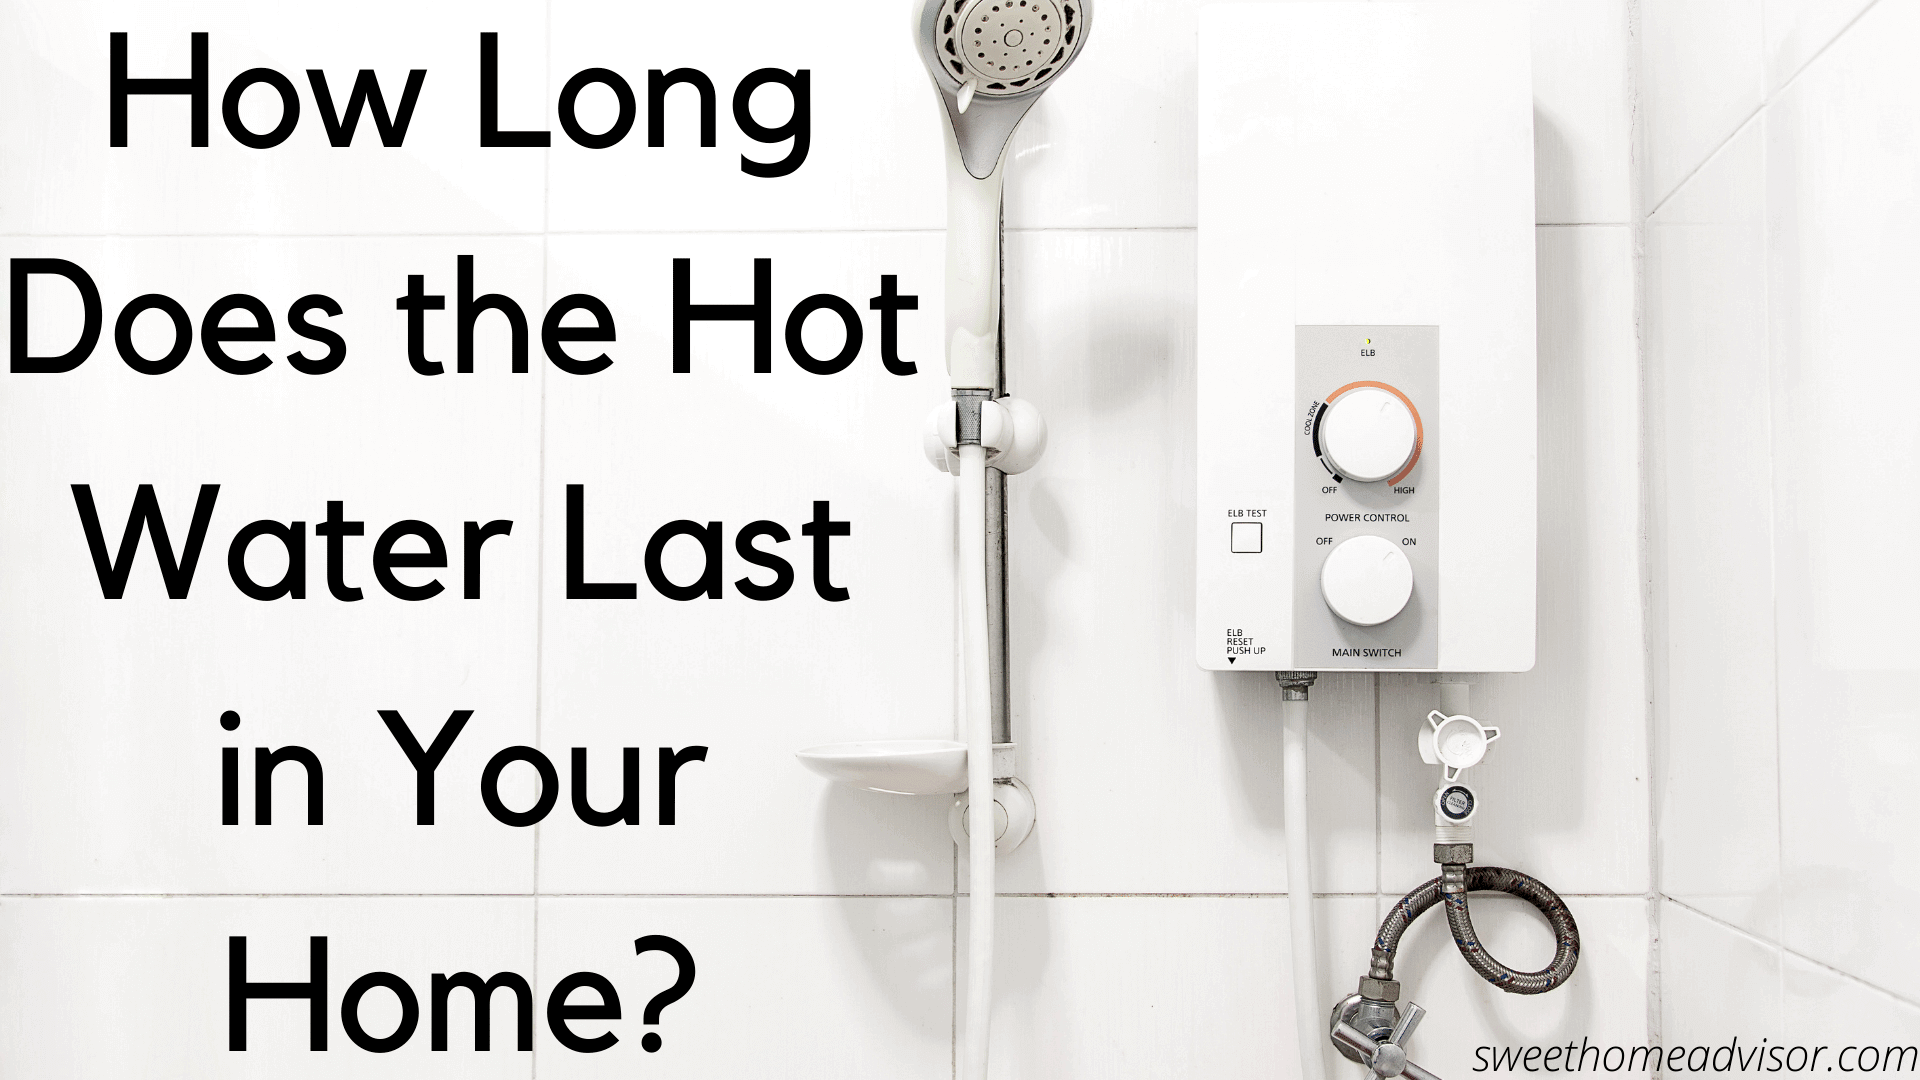 How Long Does the Hot Water Last in Your Home